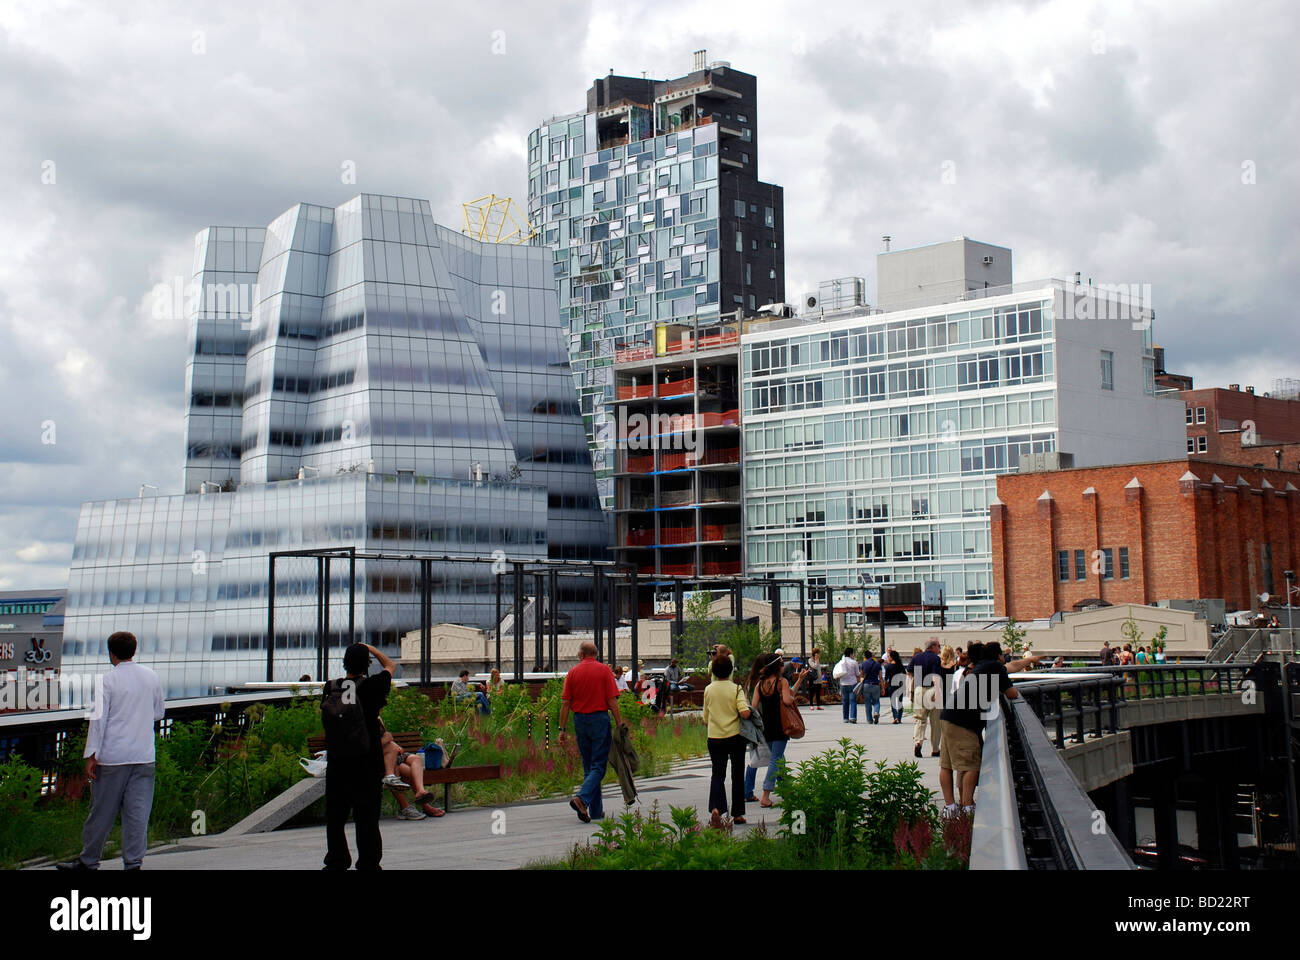 View of architecture from park that was once abandoned High Line rail service to historic warehouse district in New York City Stock Photo